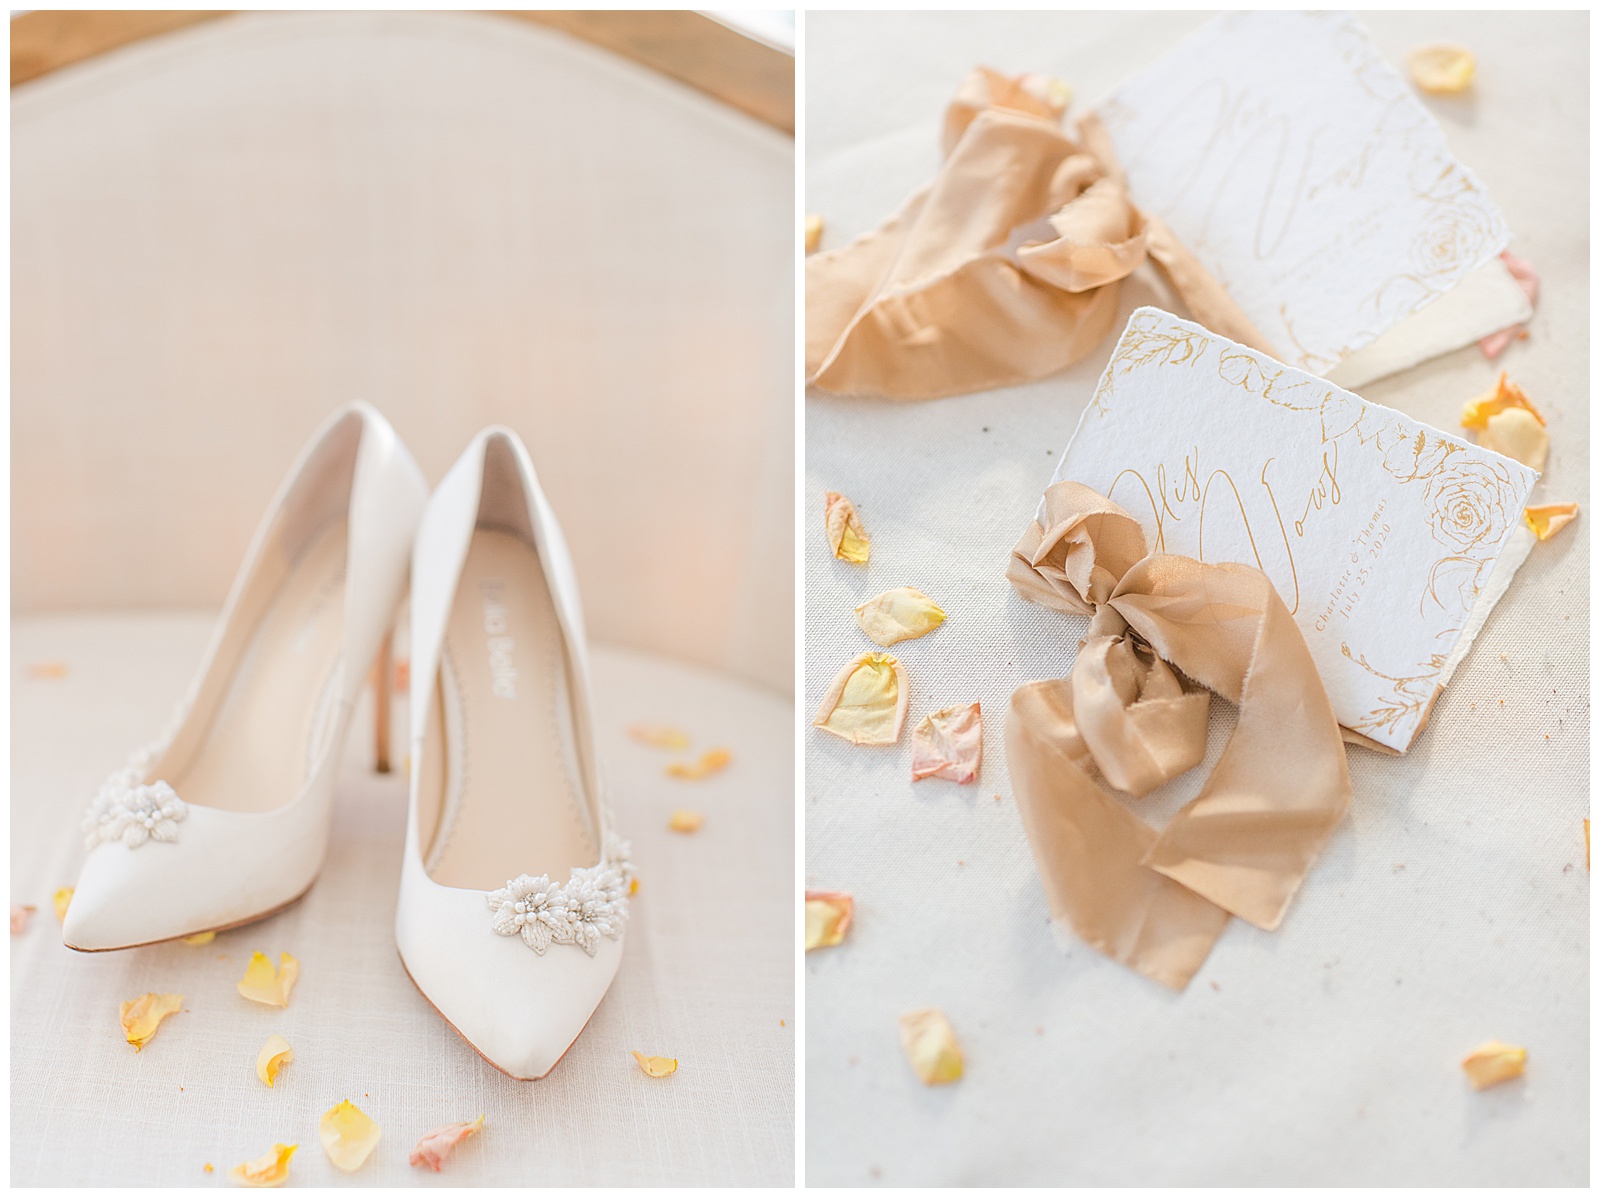 Bride's wedding shoes and details from wedding 